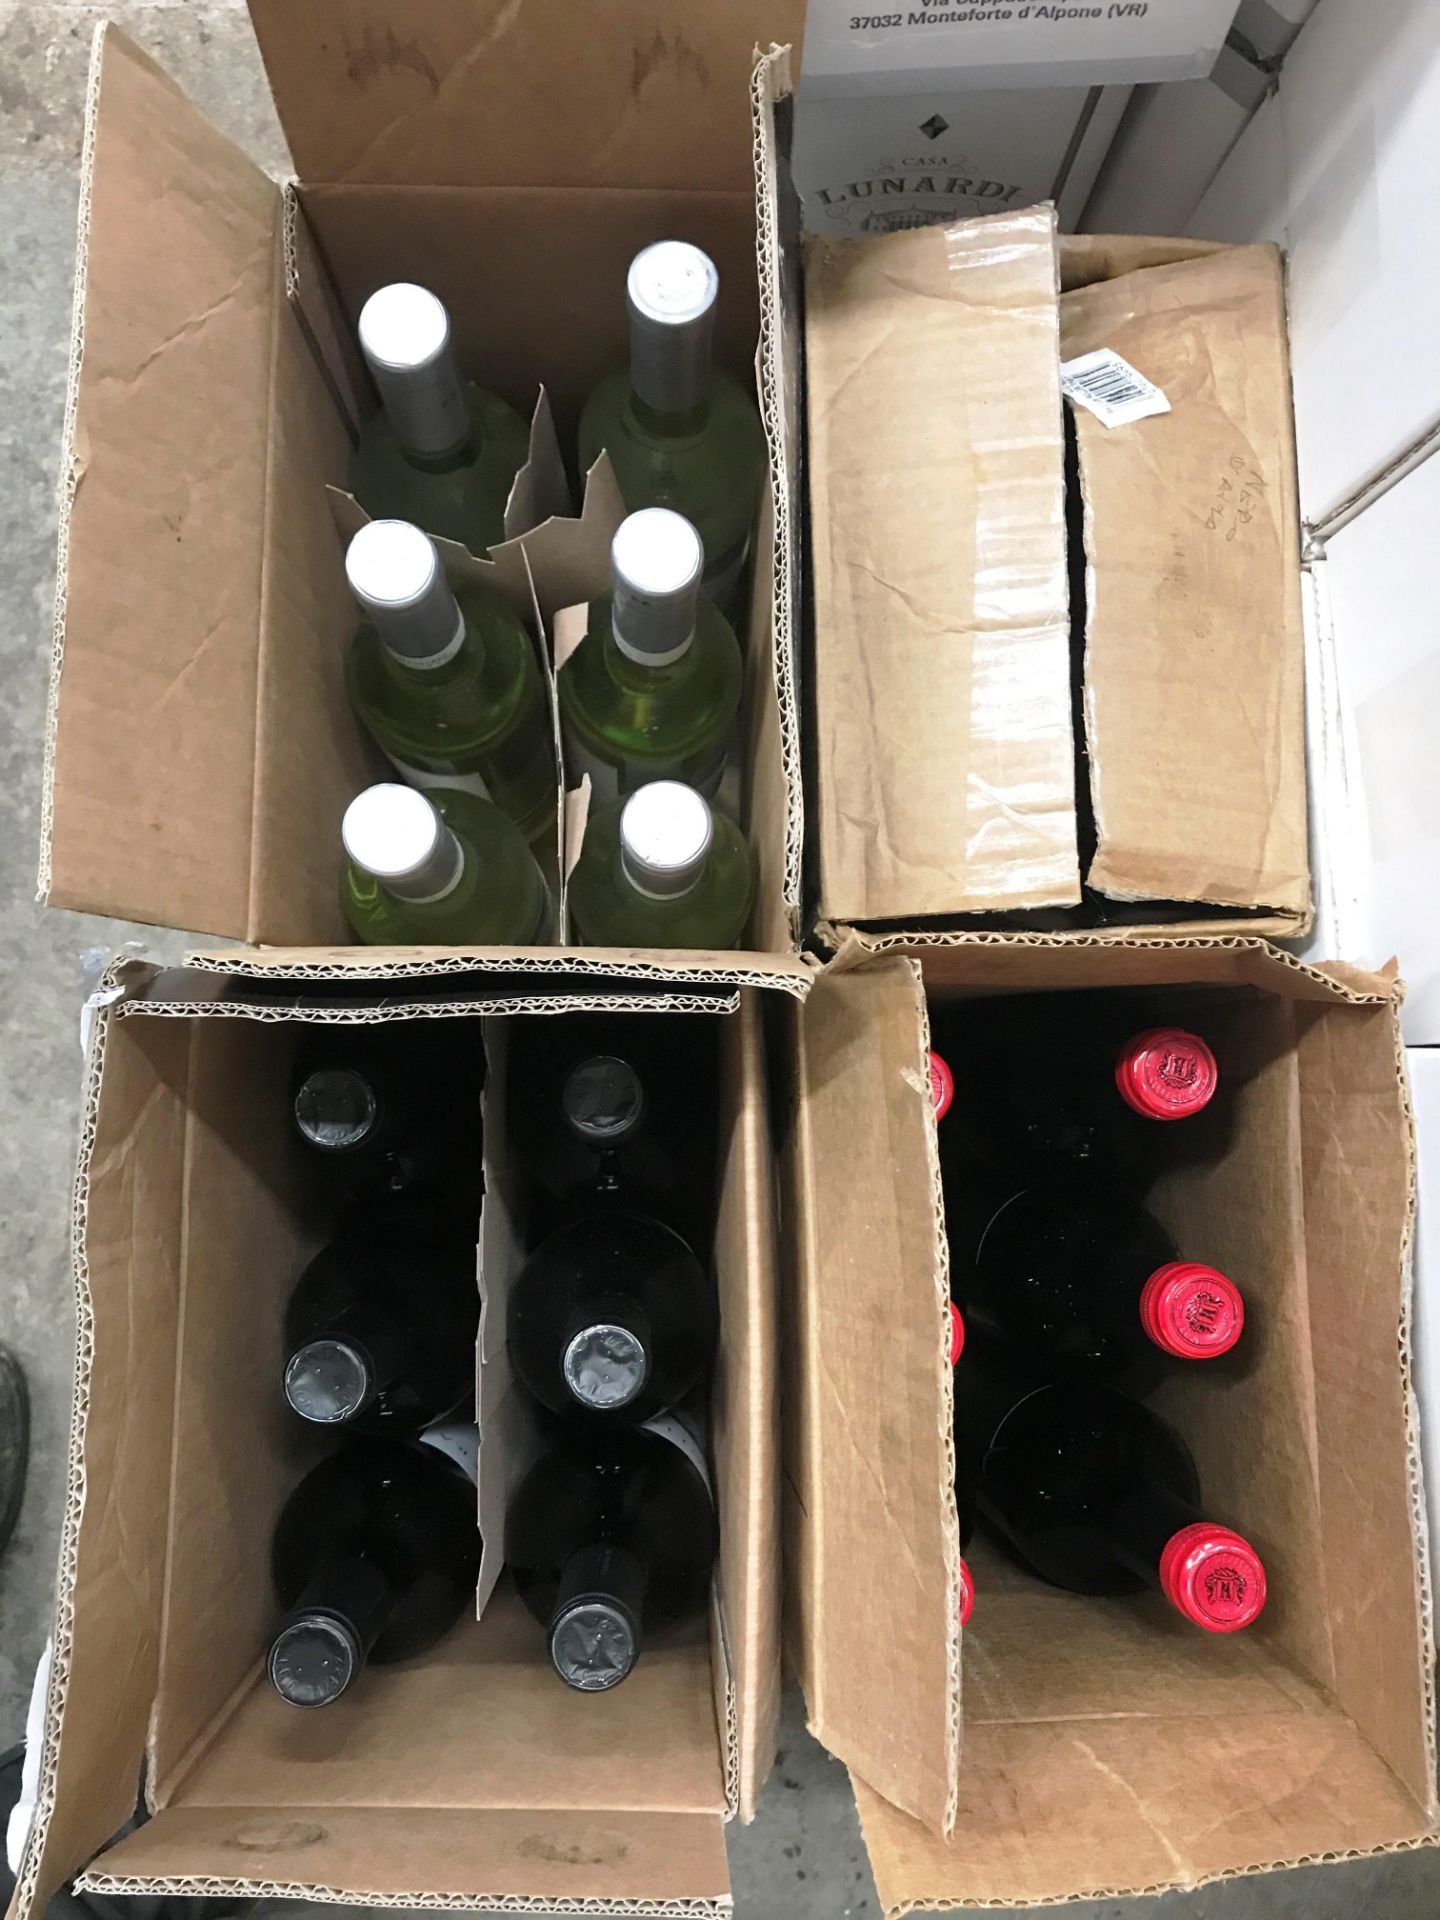 24 x Bottles of Various White & Red Wine - As Per Description / Photographs - Image 2 of 3